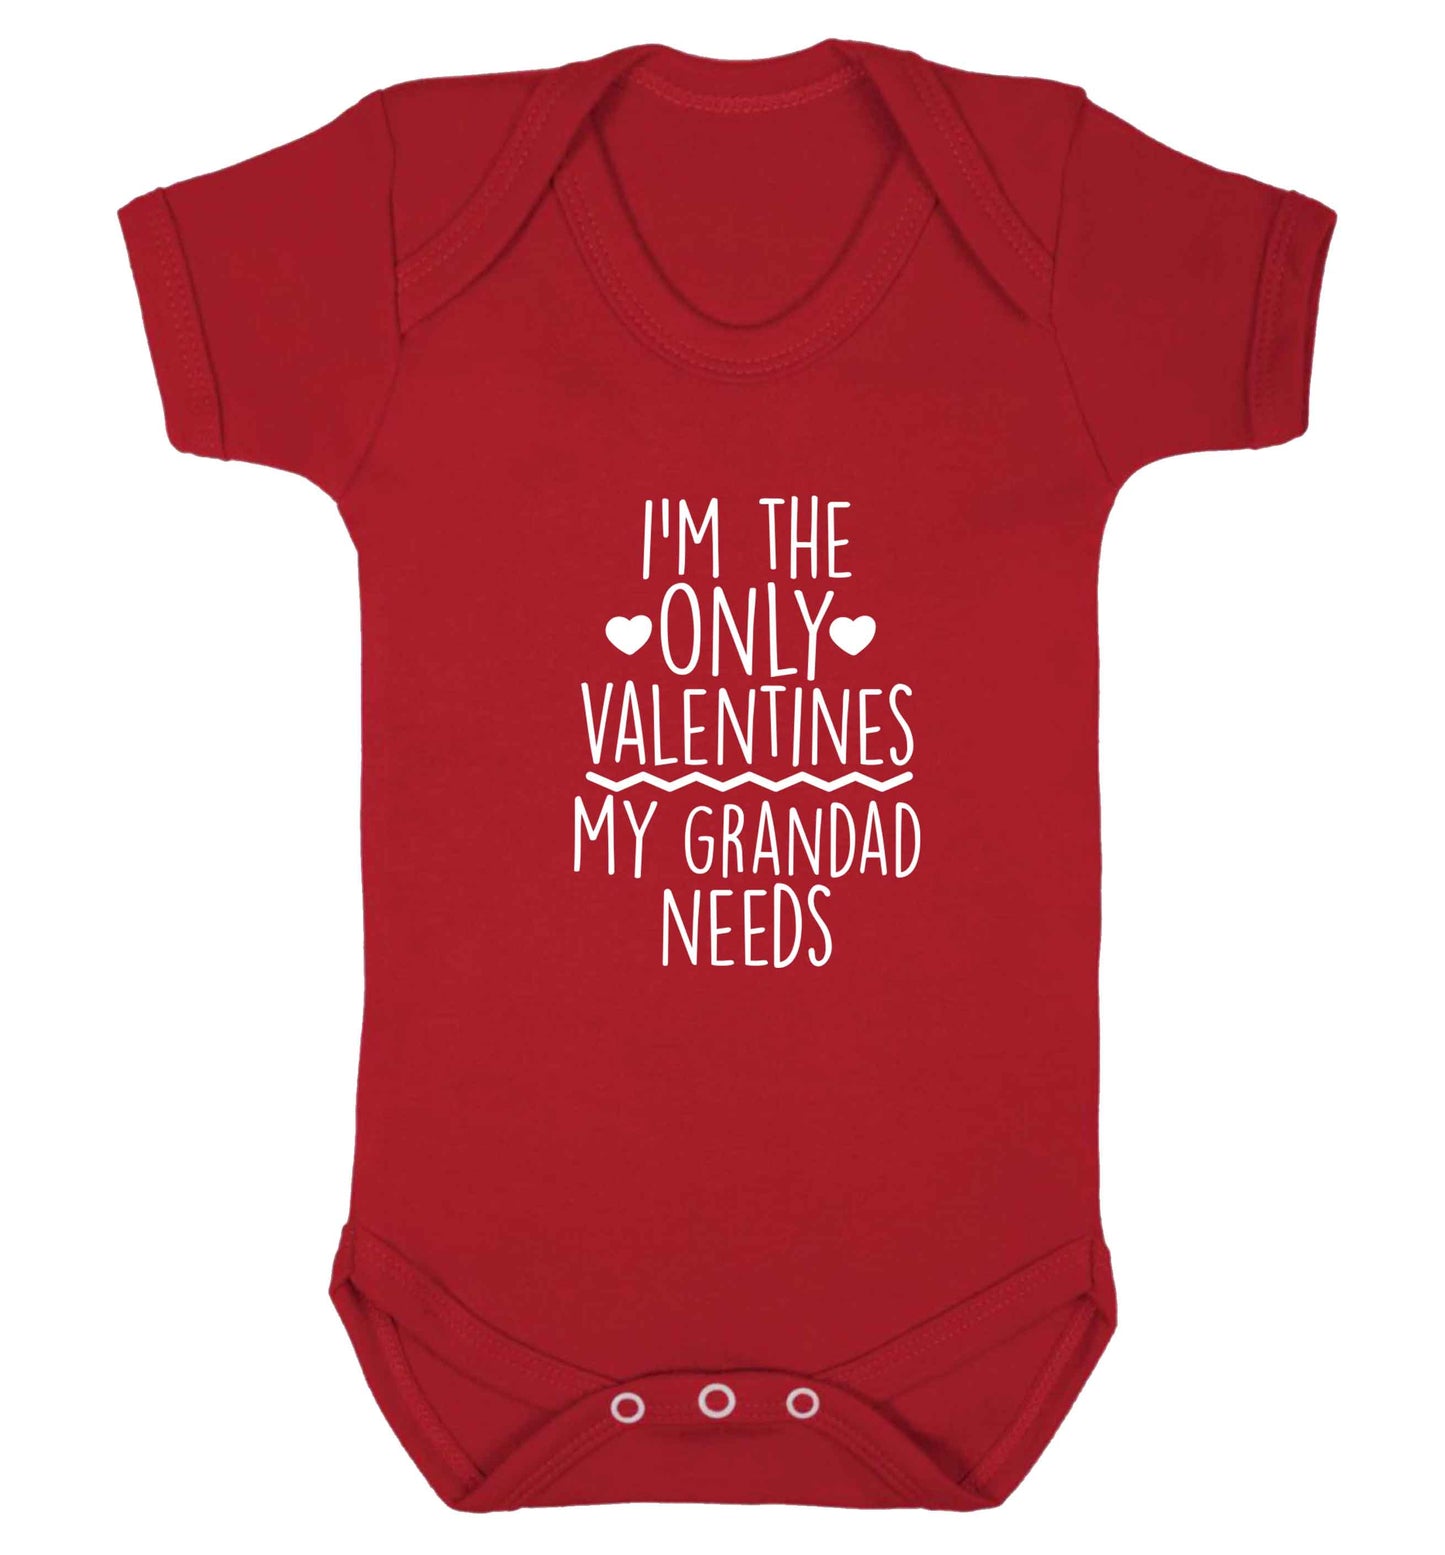 I'm the only valentines my grandad needs baby vest red 18-24 months